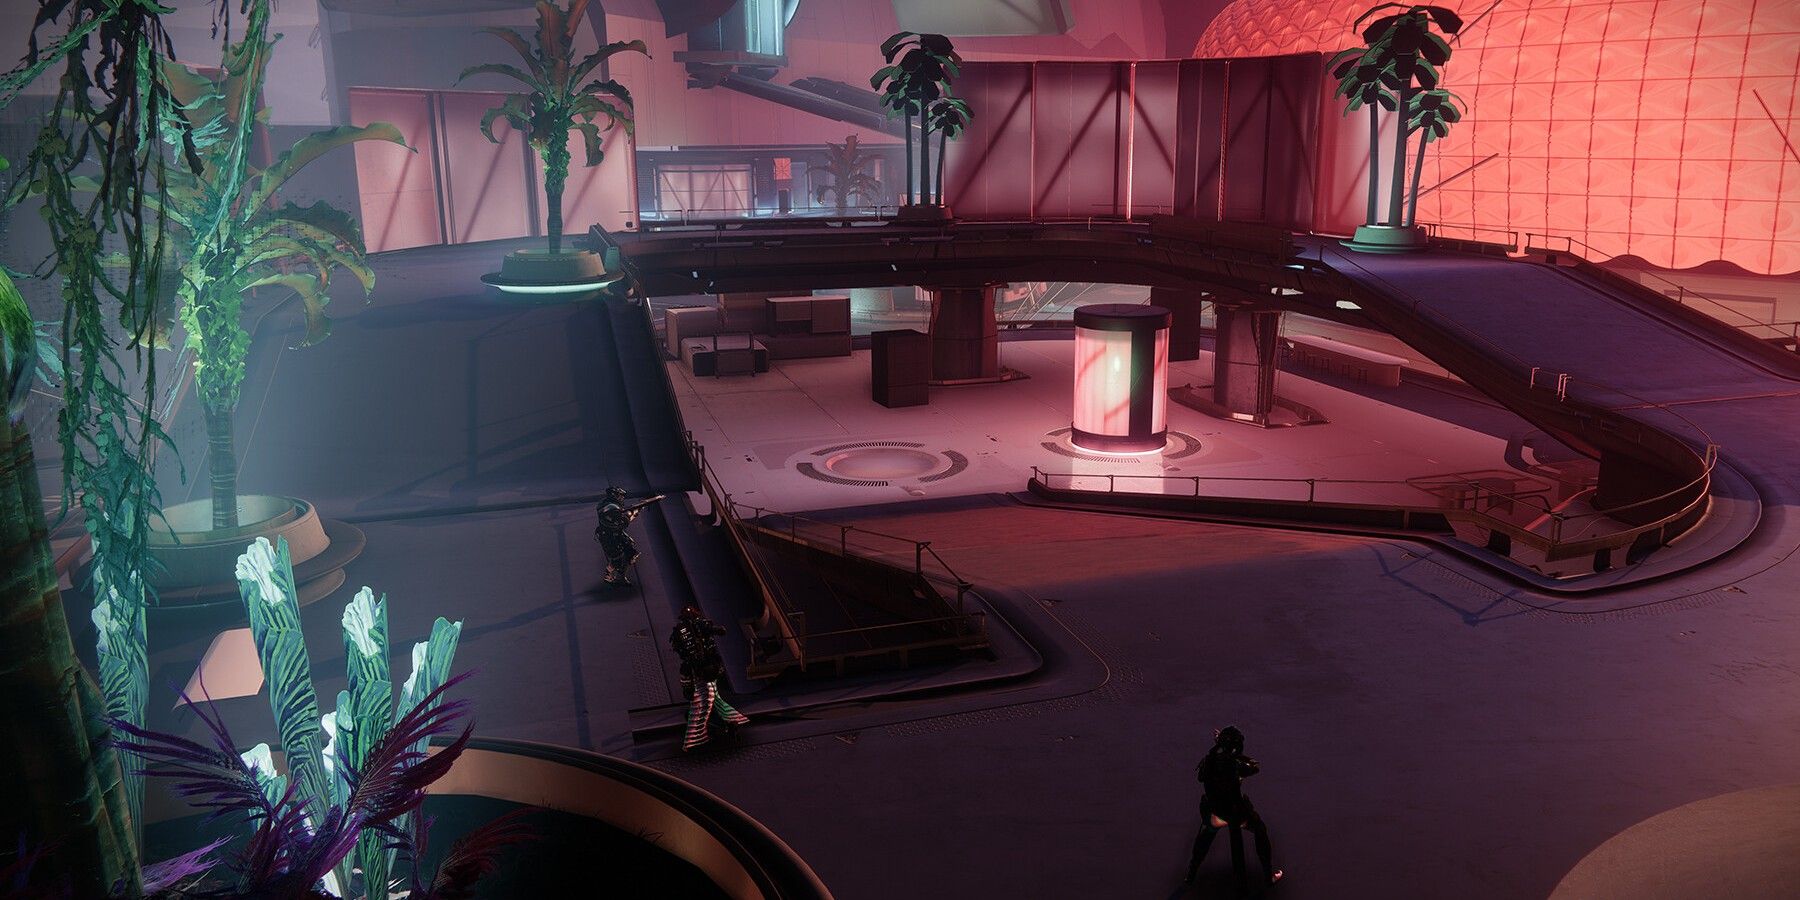 A new map from Destiny 2's Lightfall expansion